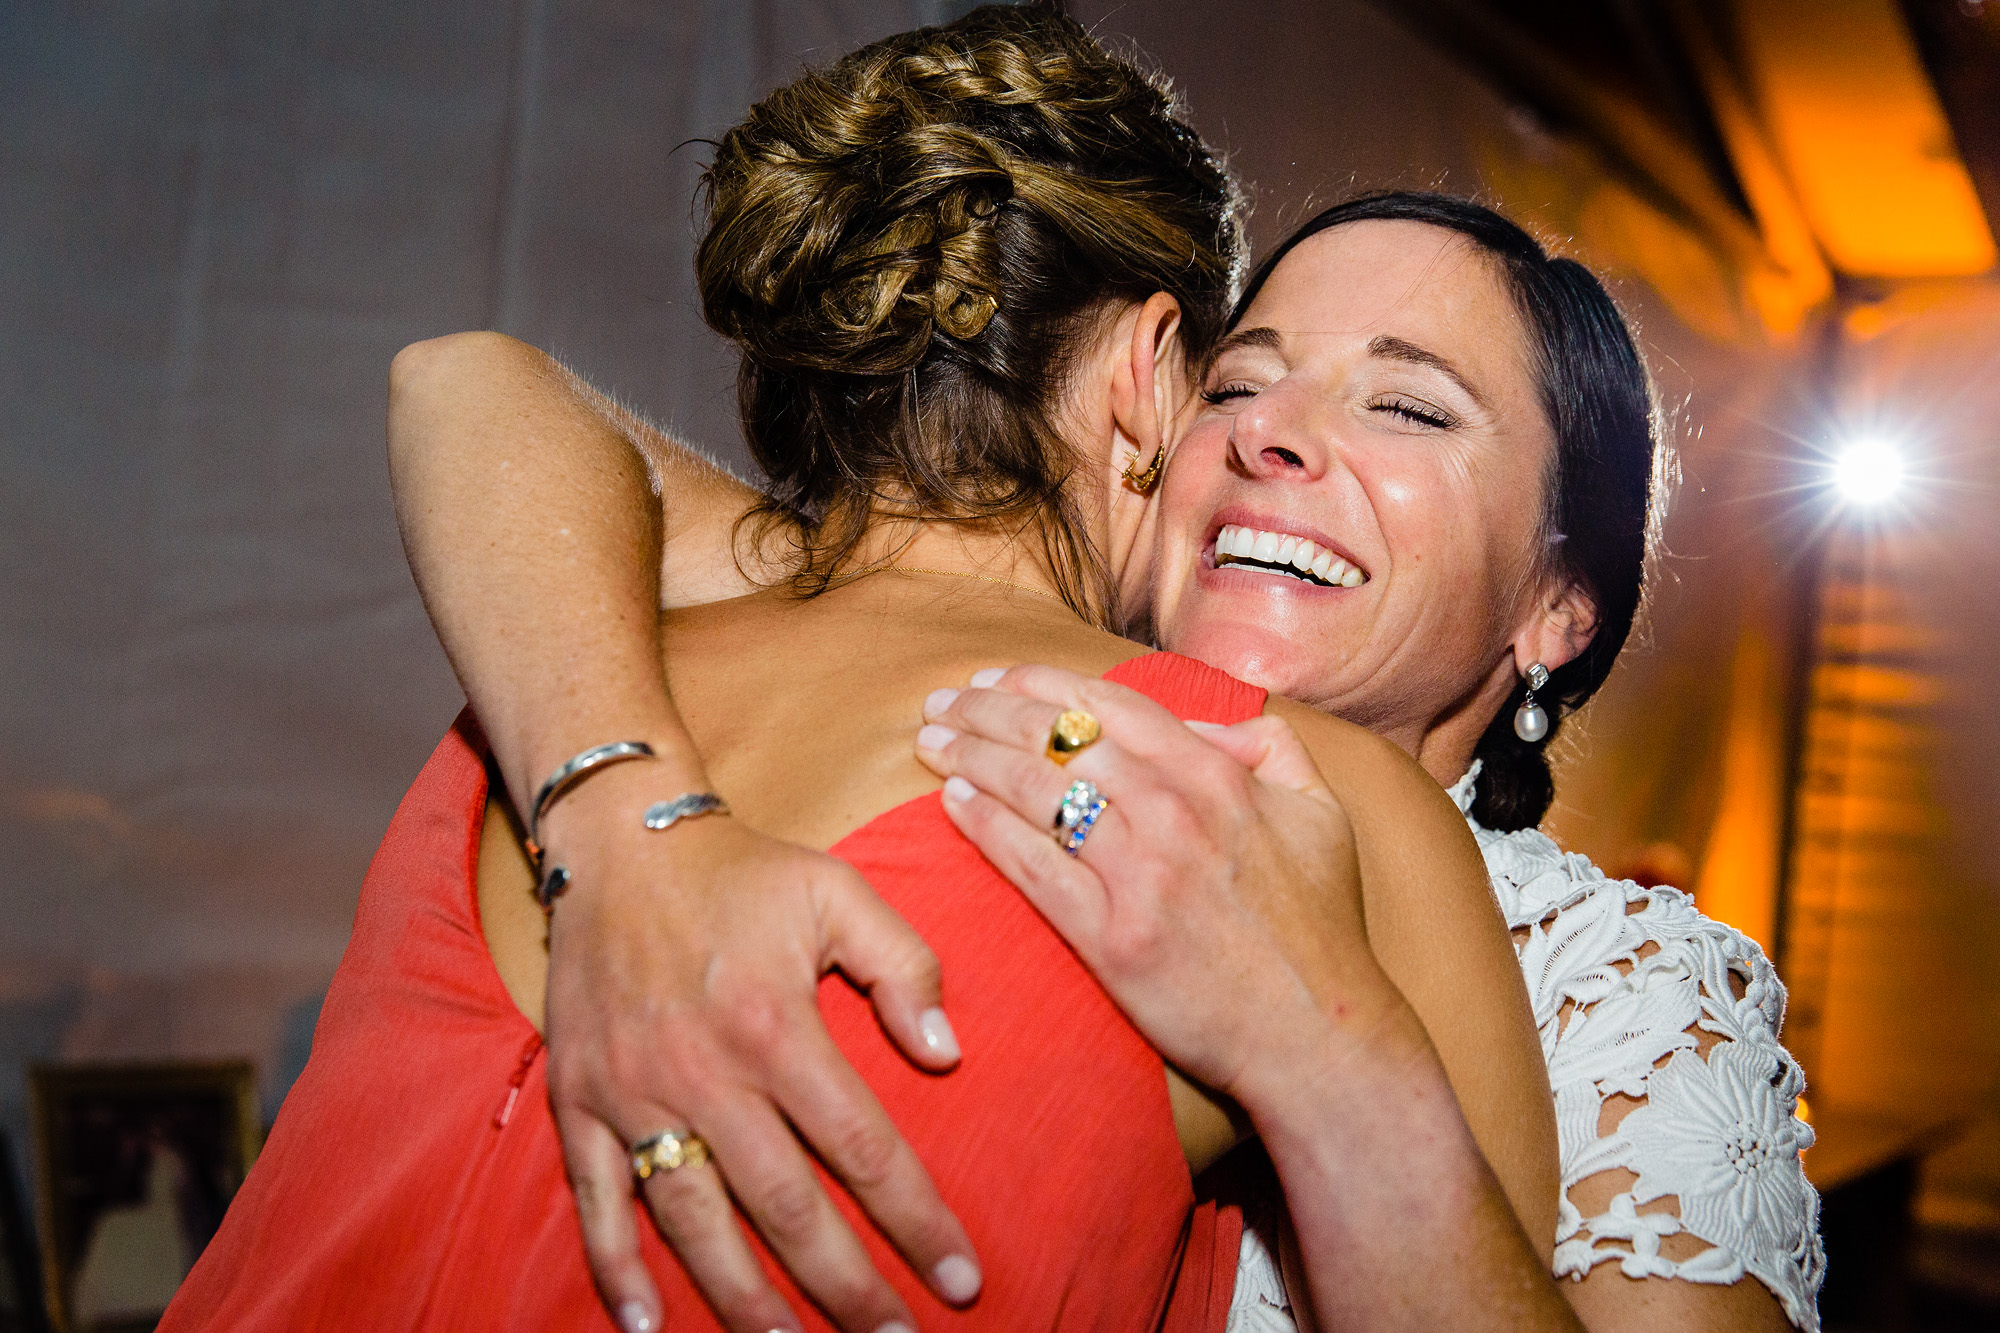 The bride hugs her bridesmaid at a Maine wedding